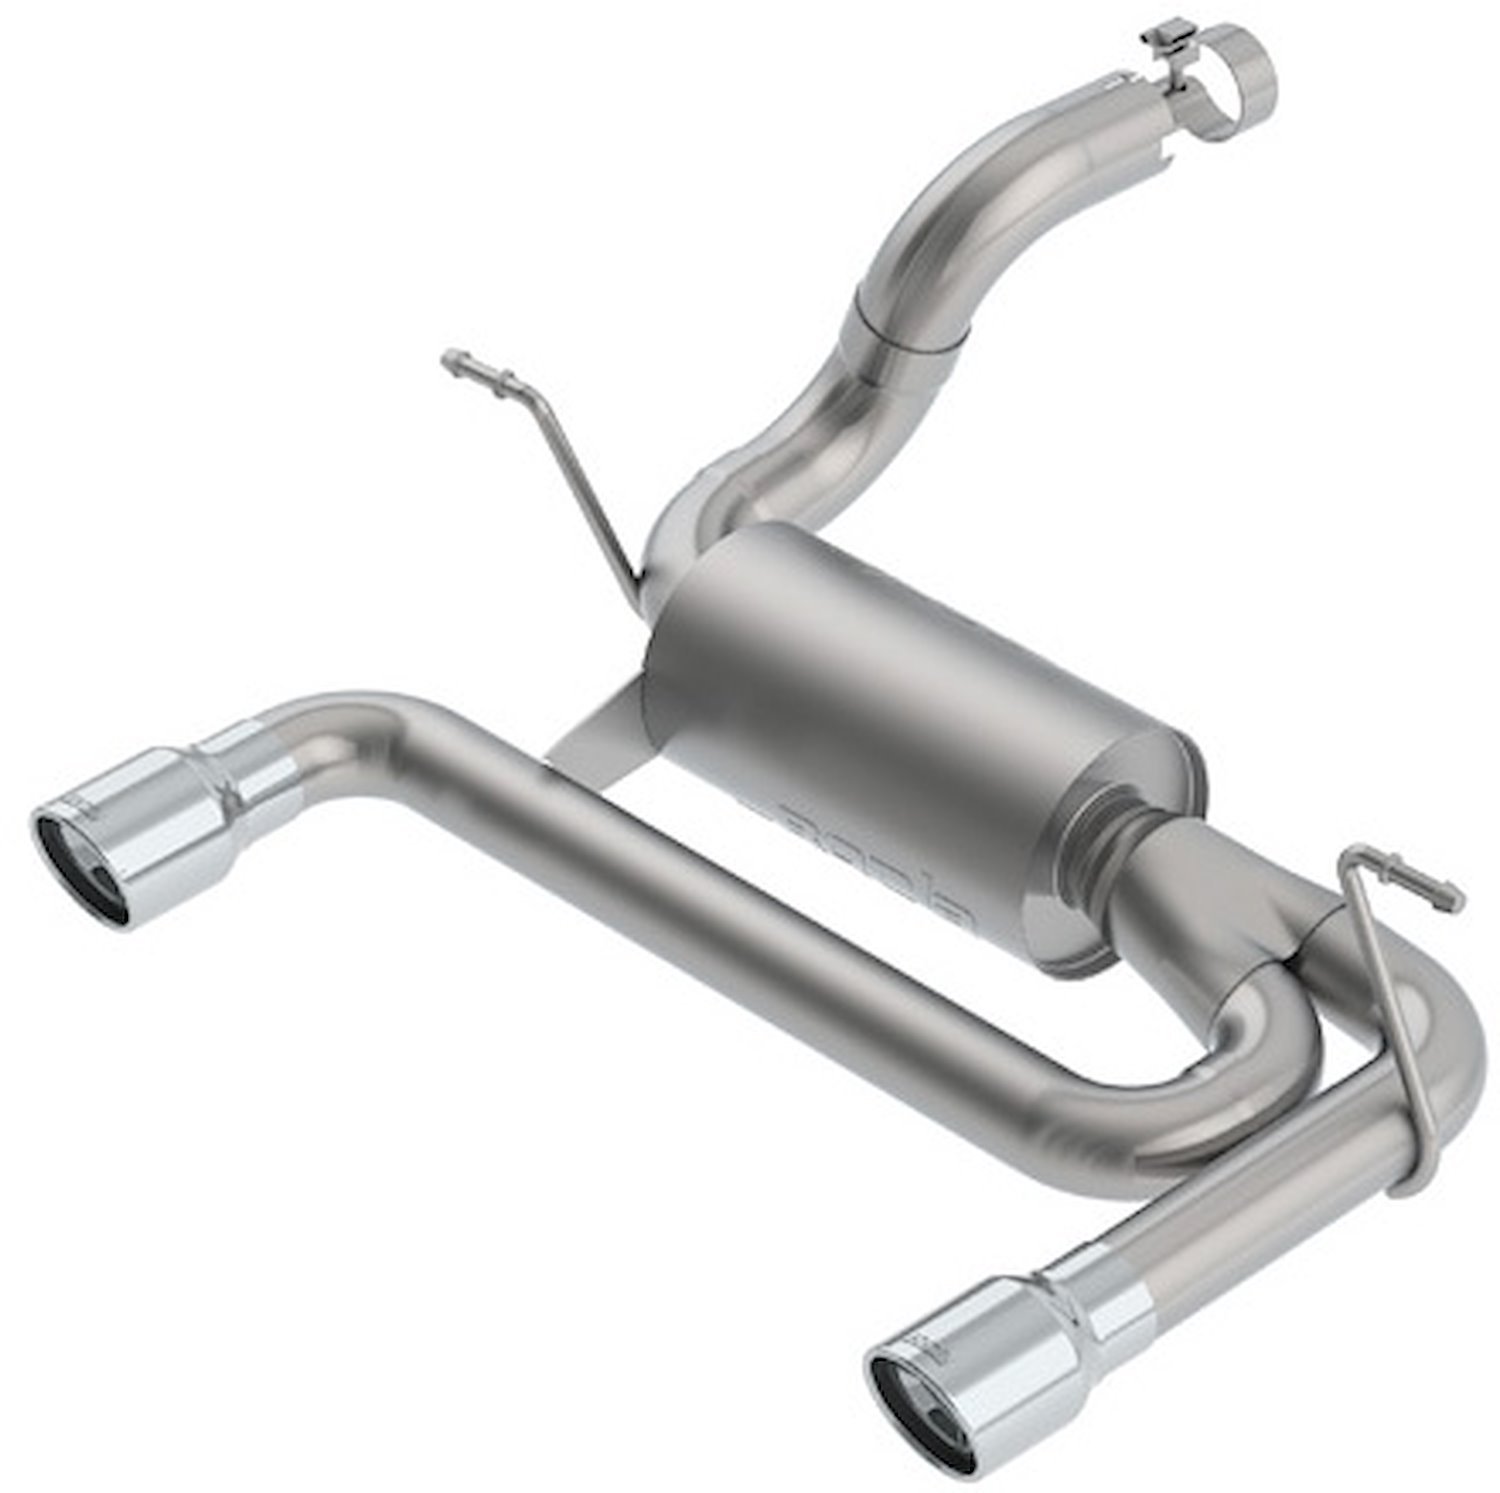 Axle-Back Exhaust System With S-Type Muffler for 2018 Jeep Wrangler JL/JLU 3.6L V6 - Polished Tips